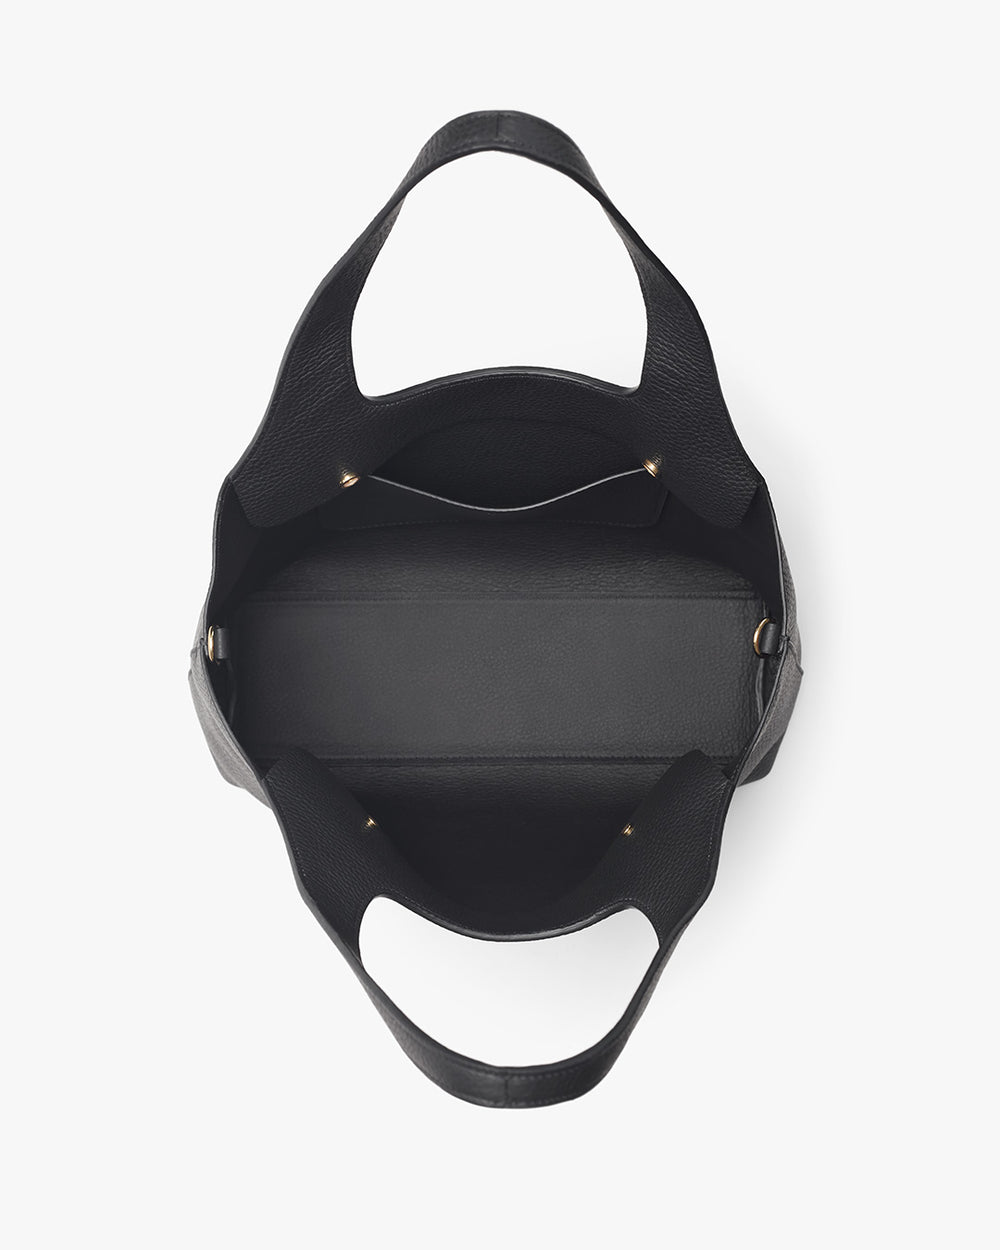 Mon Purse, a New Customizable Bag Concept, Makes Its American